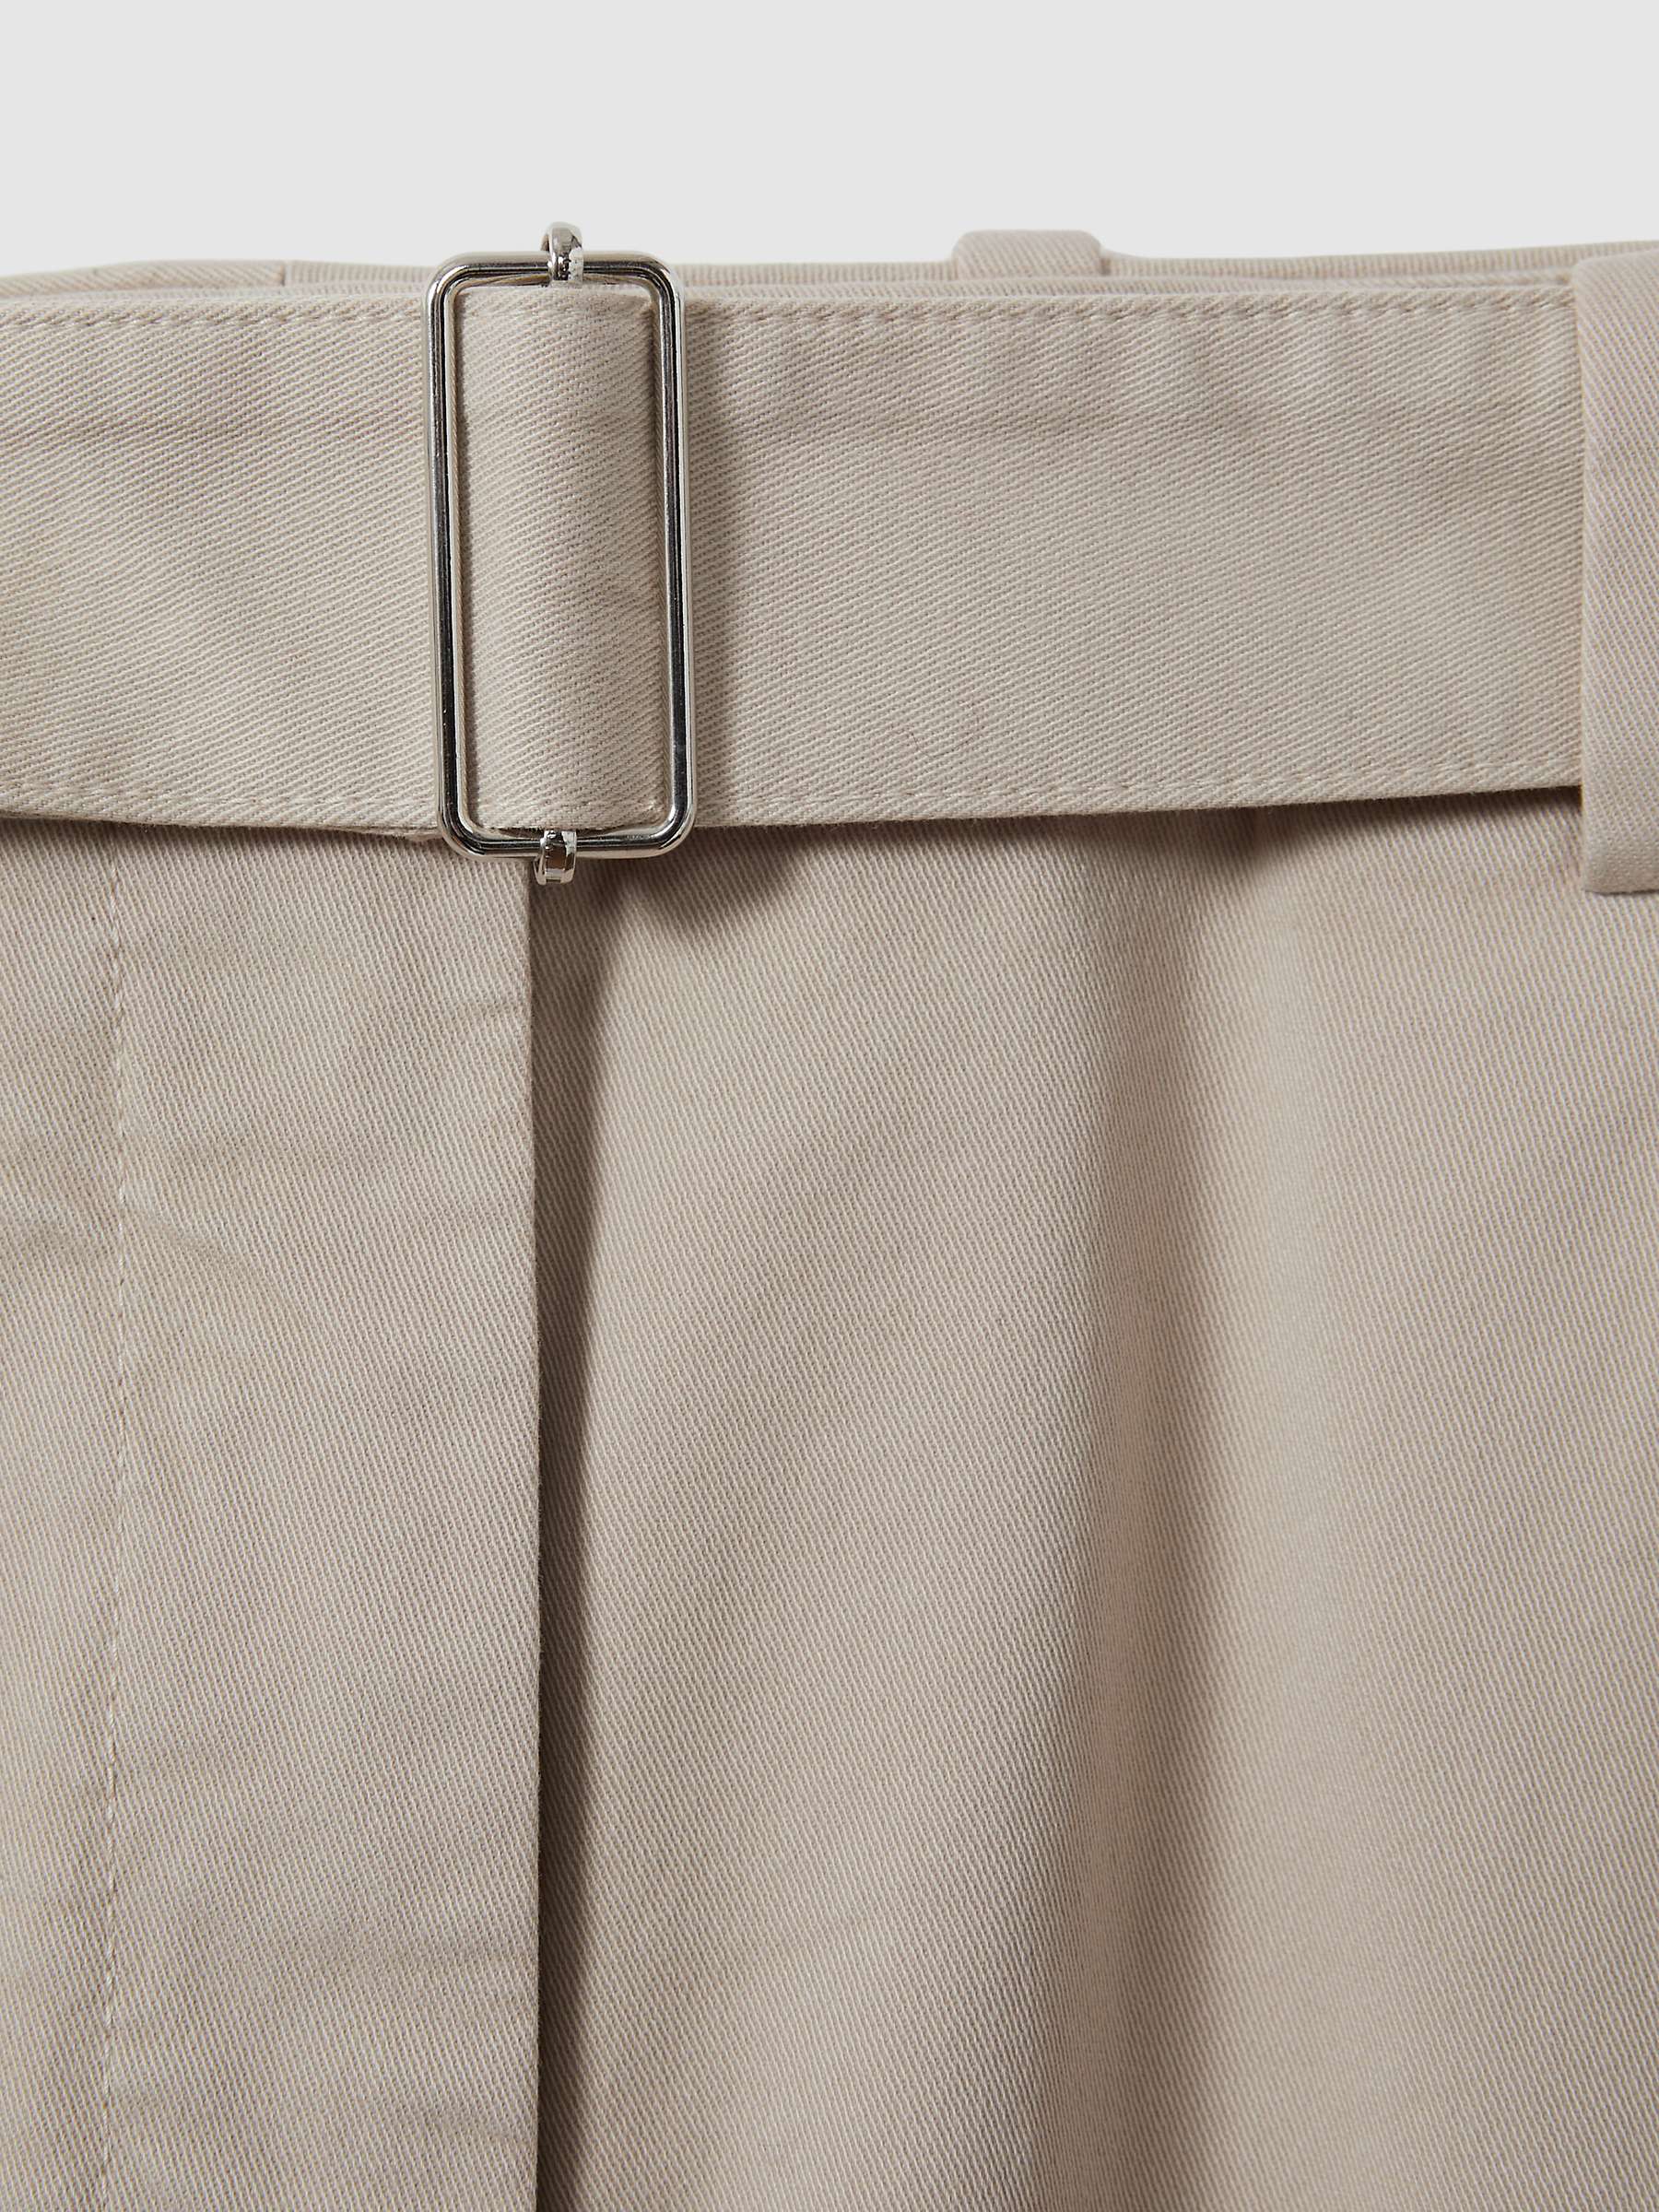 Buy Reiss Hutton Tapered Cotton Trousers, Stone Online at johnlewis.com